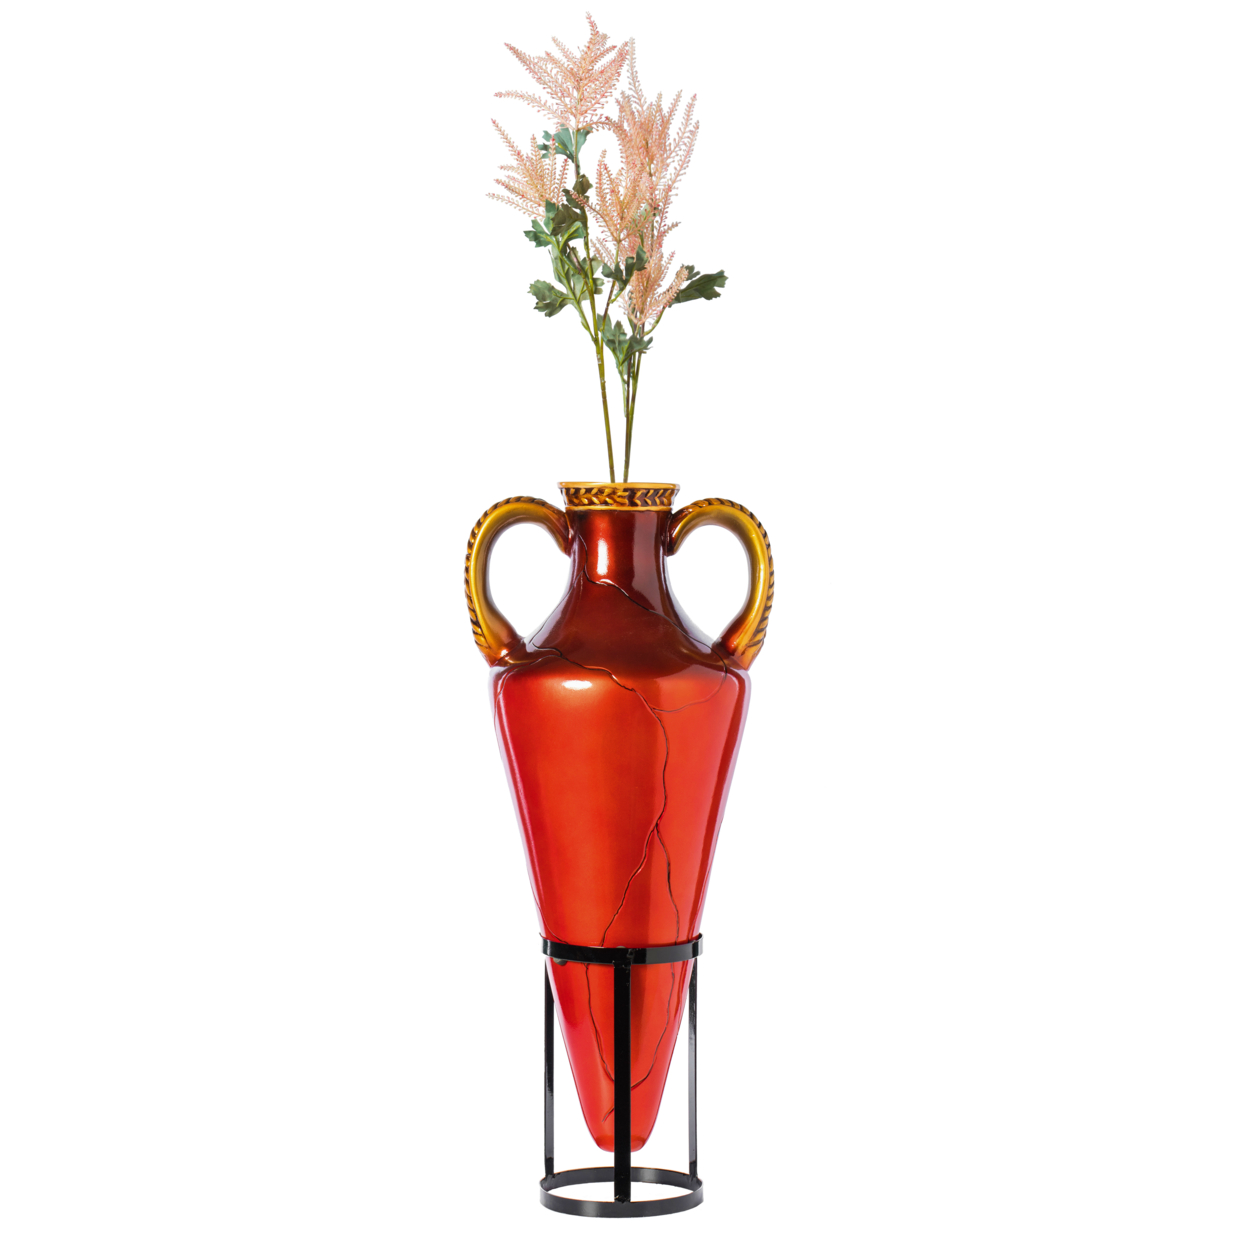 Tall Floor Vase, Roman Style Large Pointed Amphora, 35 Floor Vase, Interior Decoration, Metal Tripod Stand, Red And Gold Vase